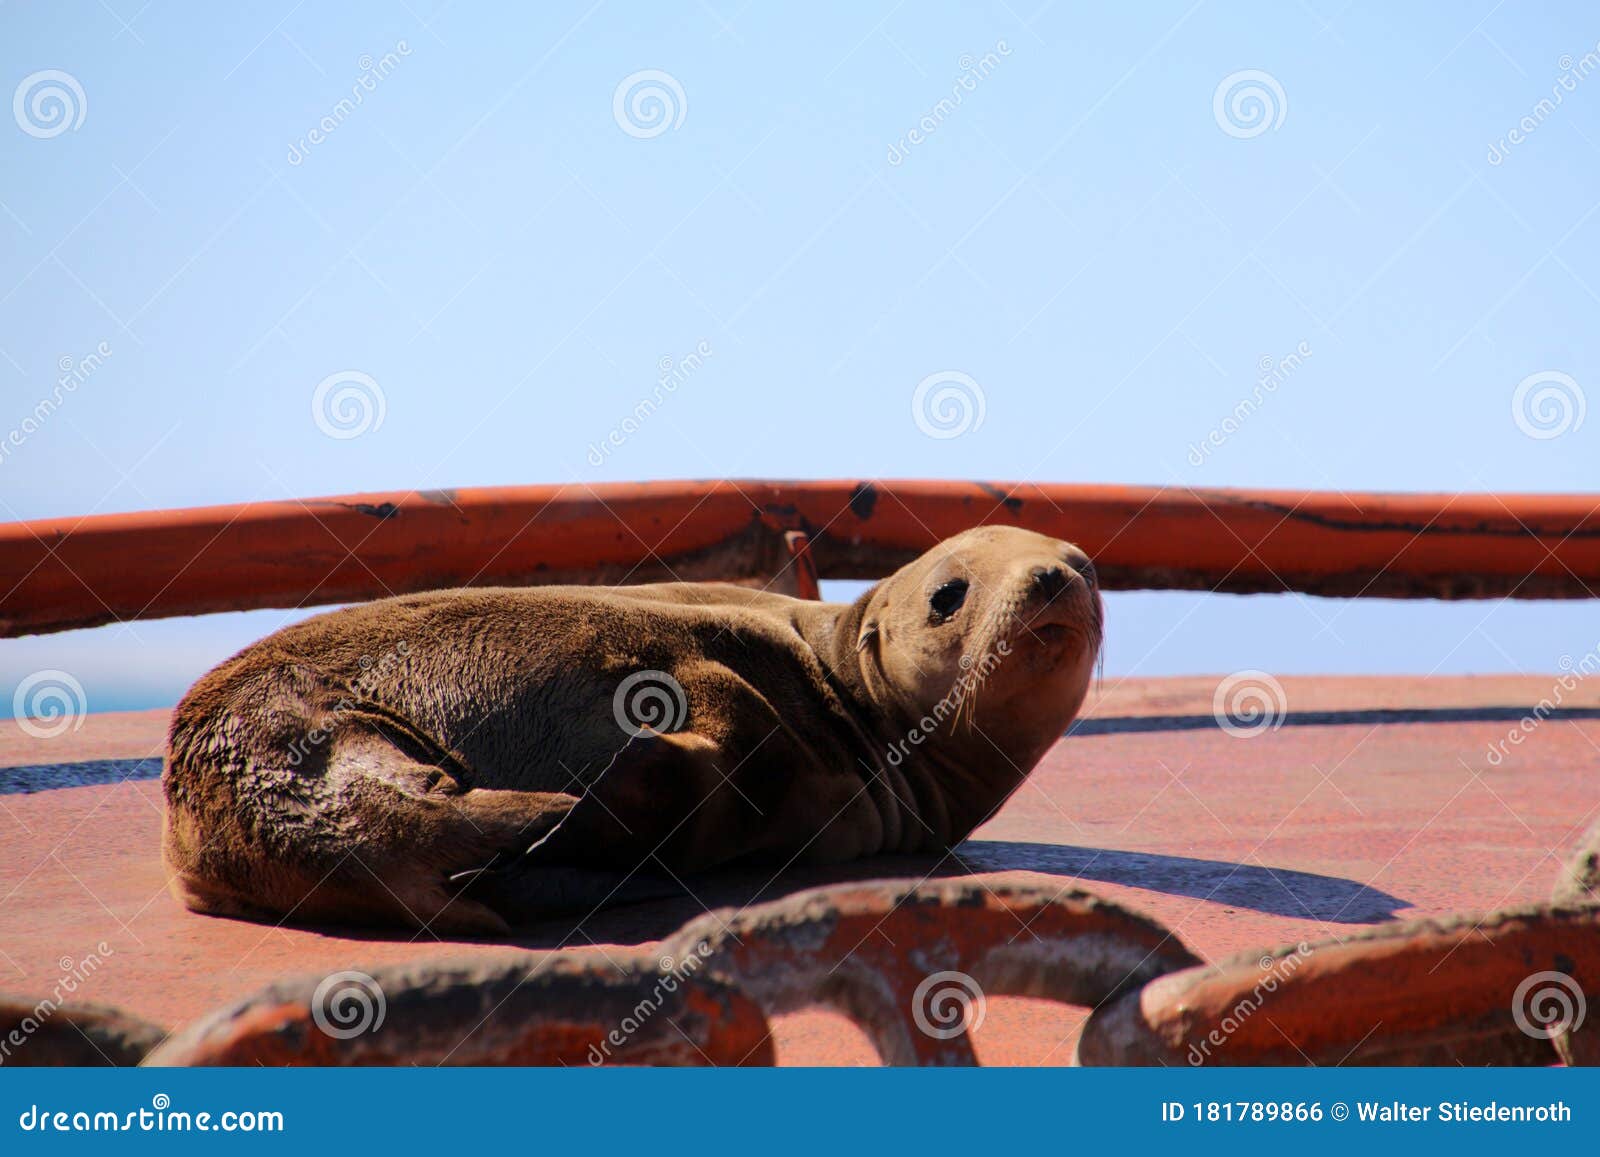 california sea lion basking in the sun on a buoy